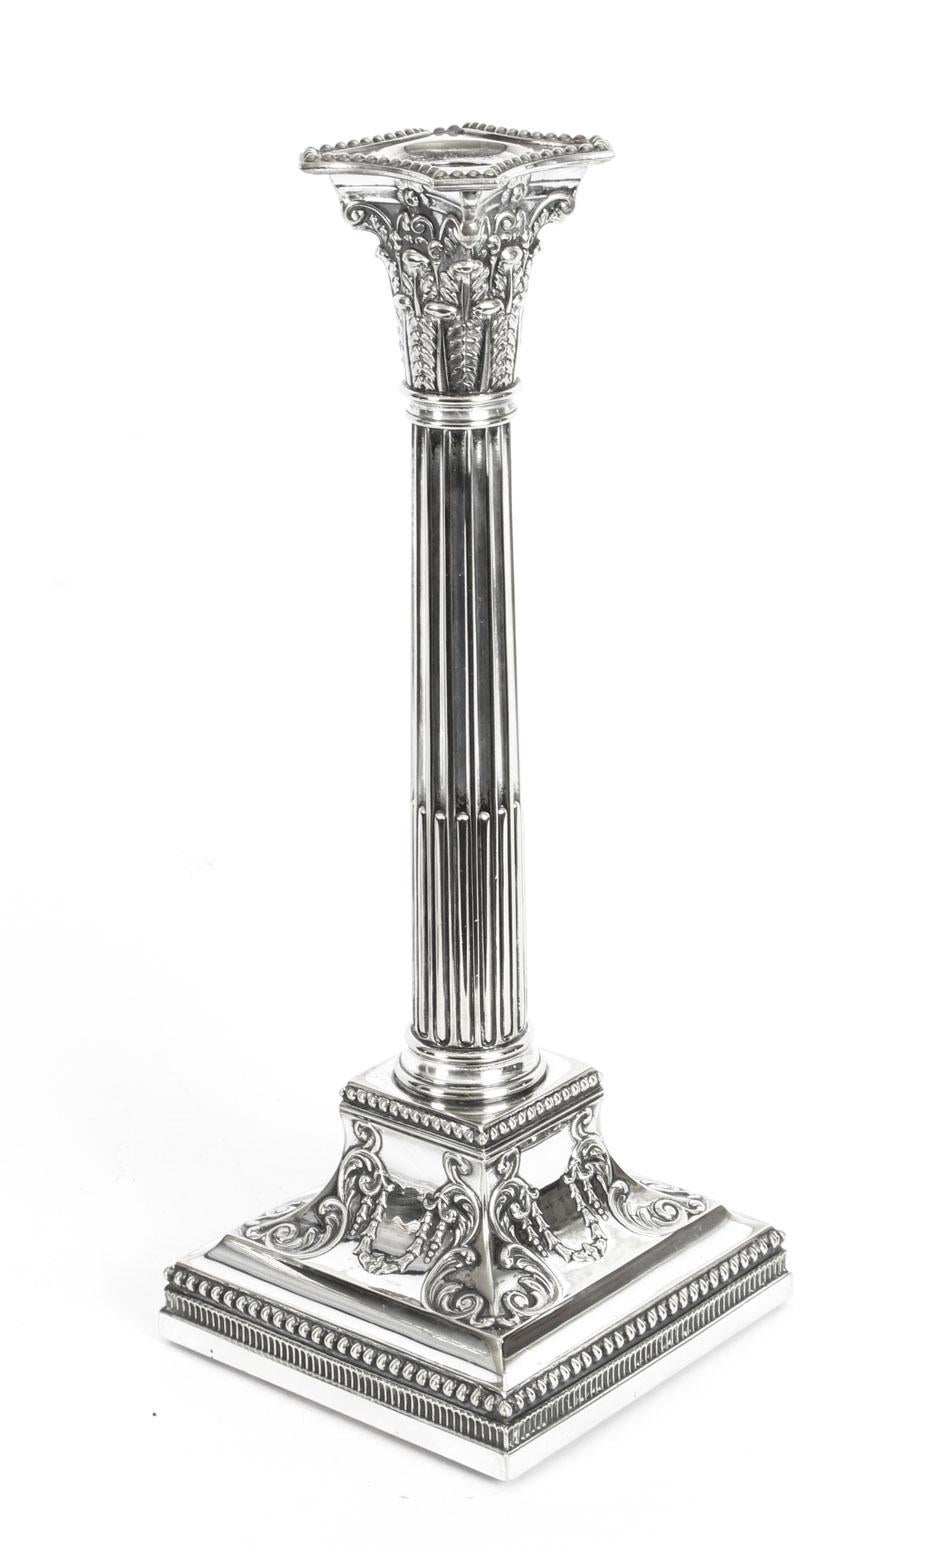 English Antique Pair of Silver Plated Candlesticks by James Dixon, 19th Century